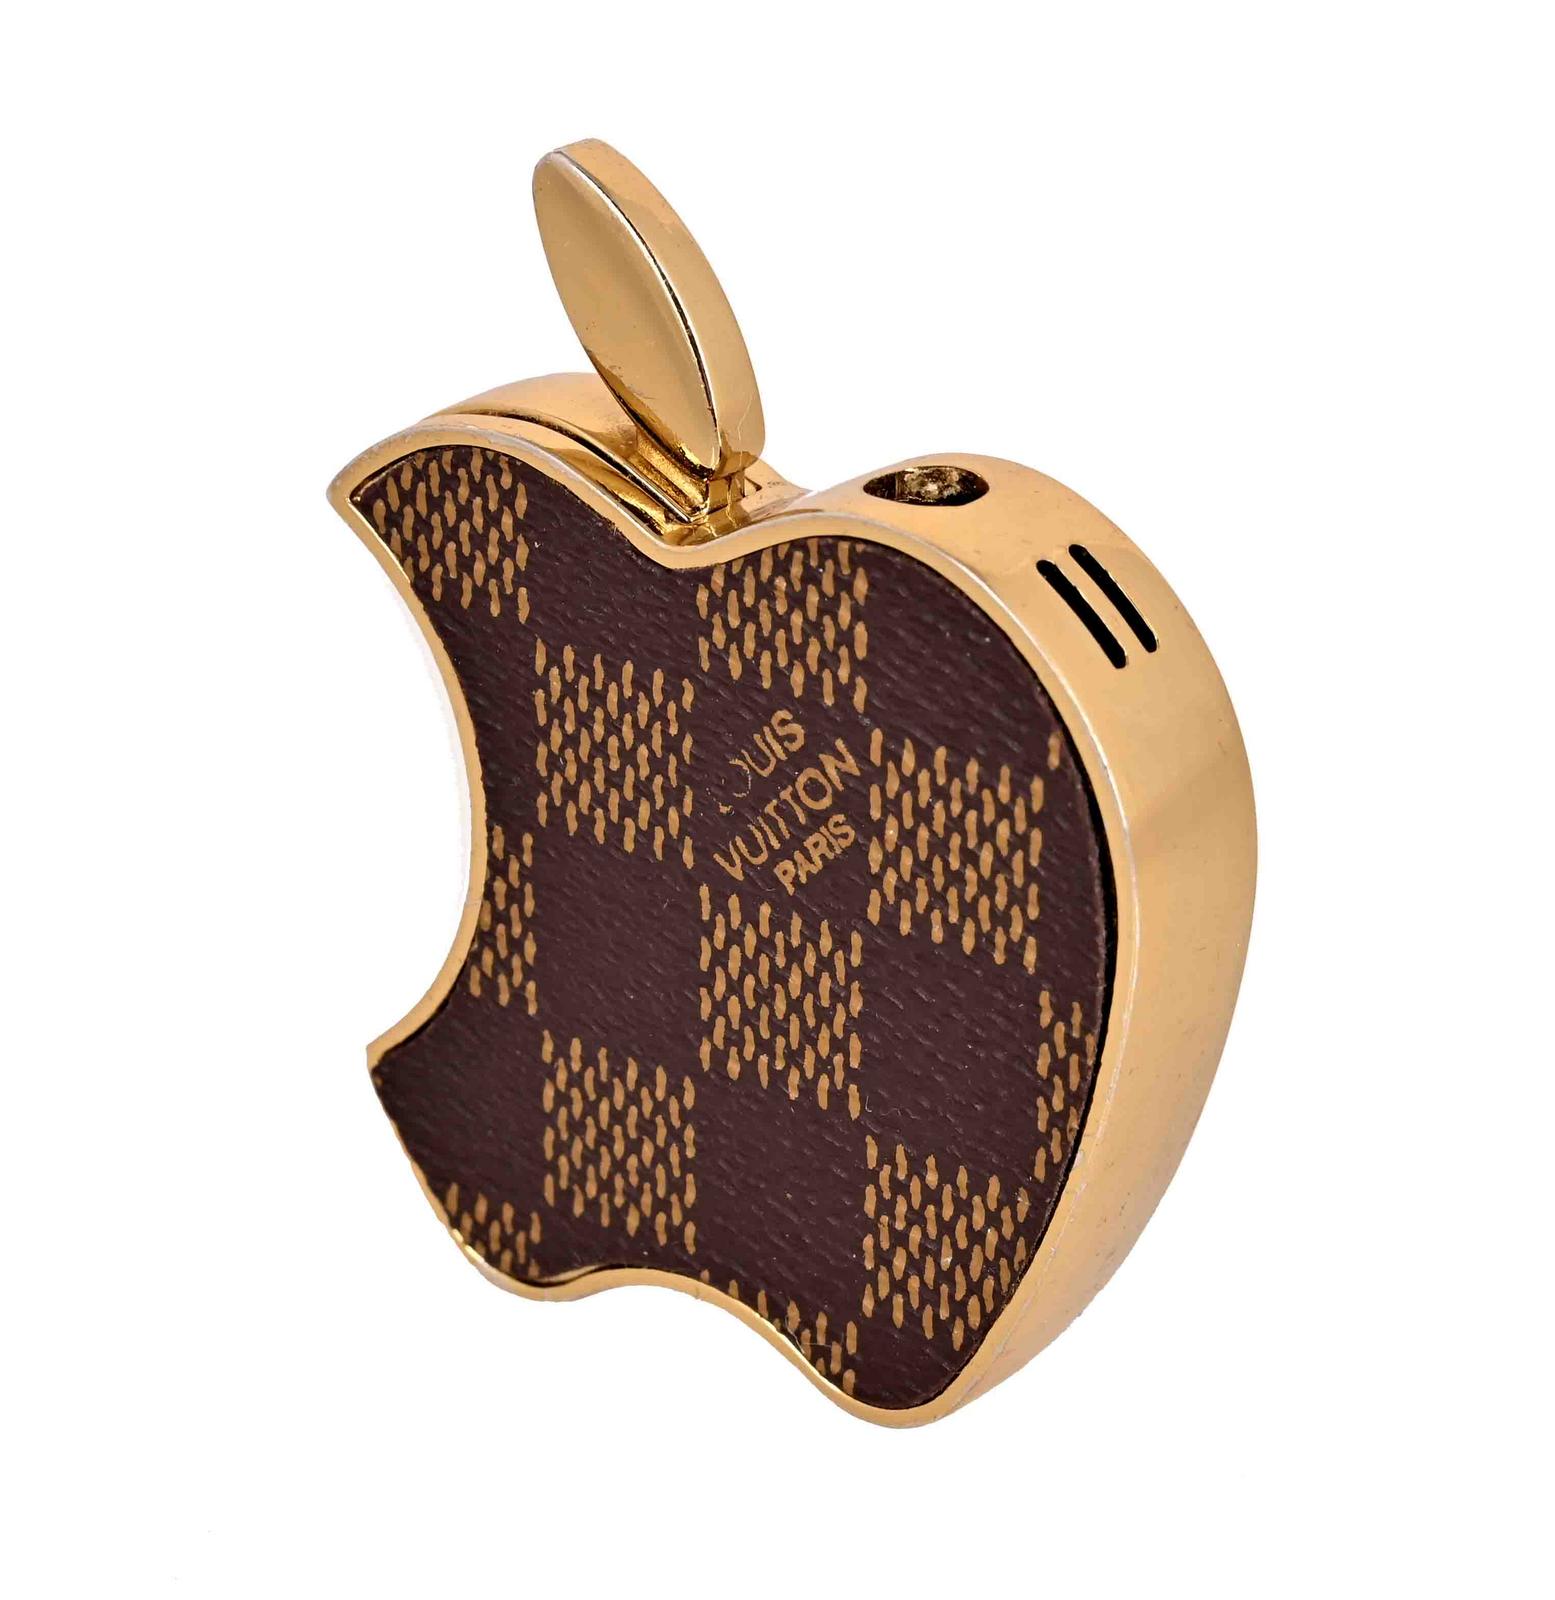 Louis Vuitton for Apple lighter, in the shape of the Microsoft Apple Logo  with gold finishers, 5 x 5.5 x 1cm